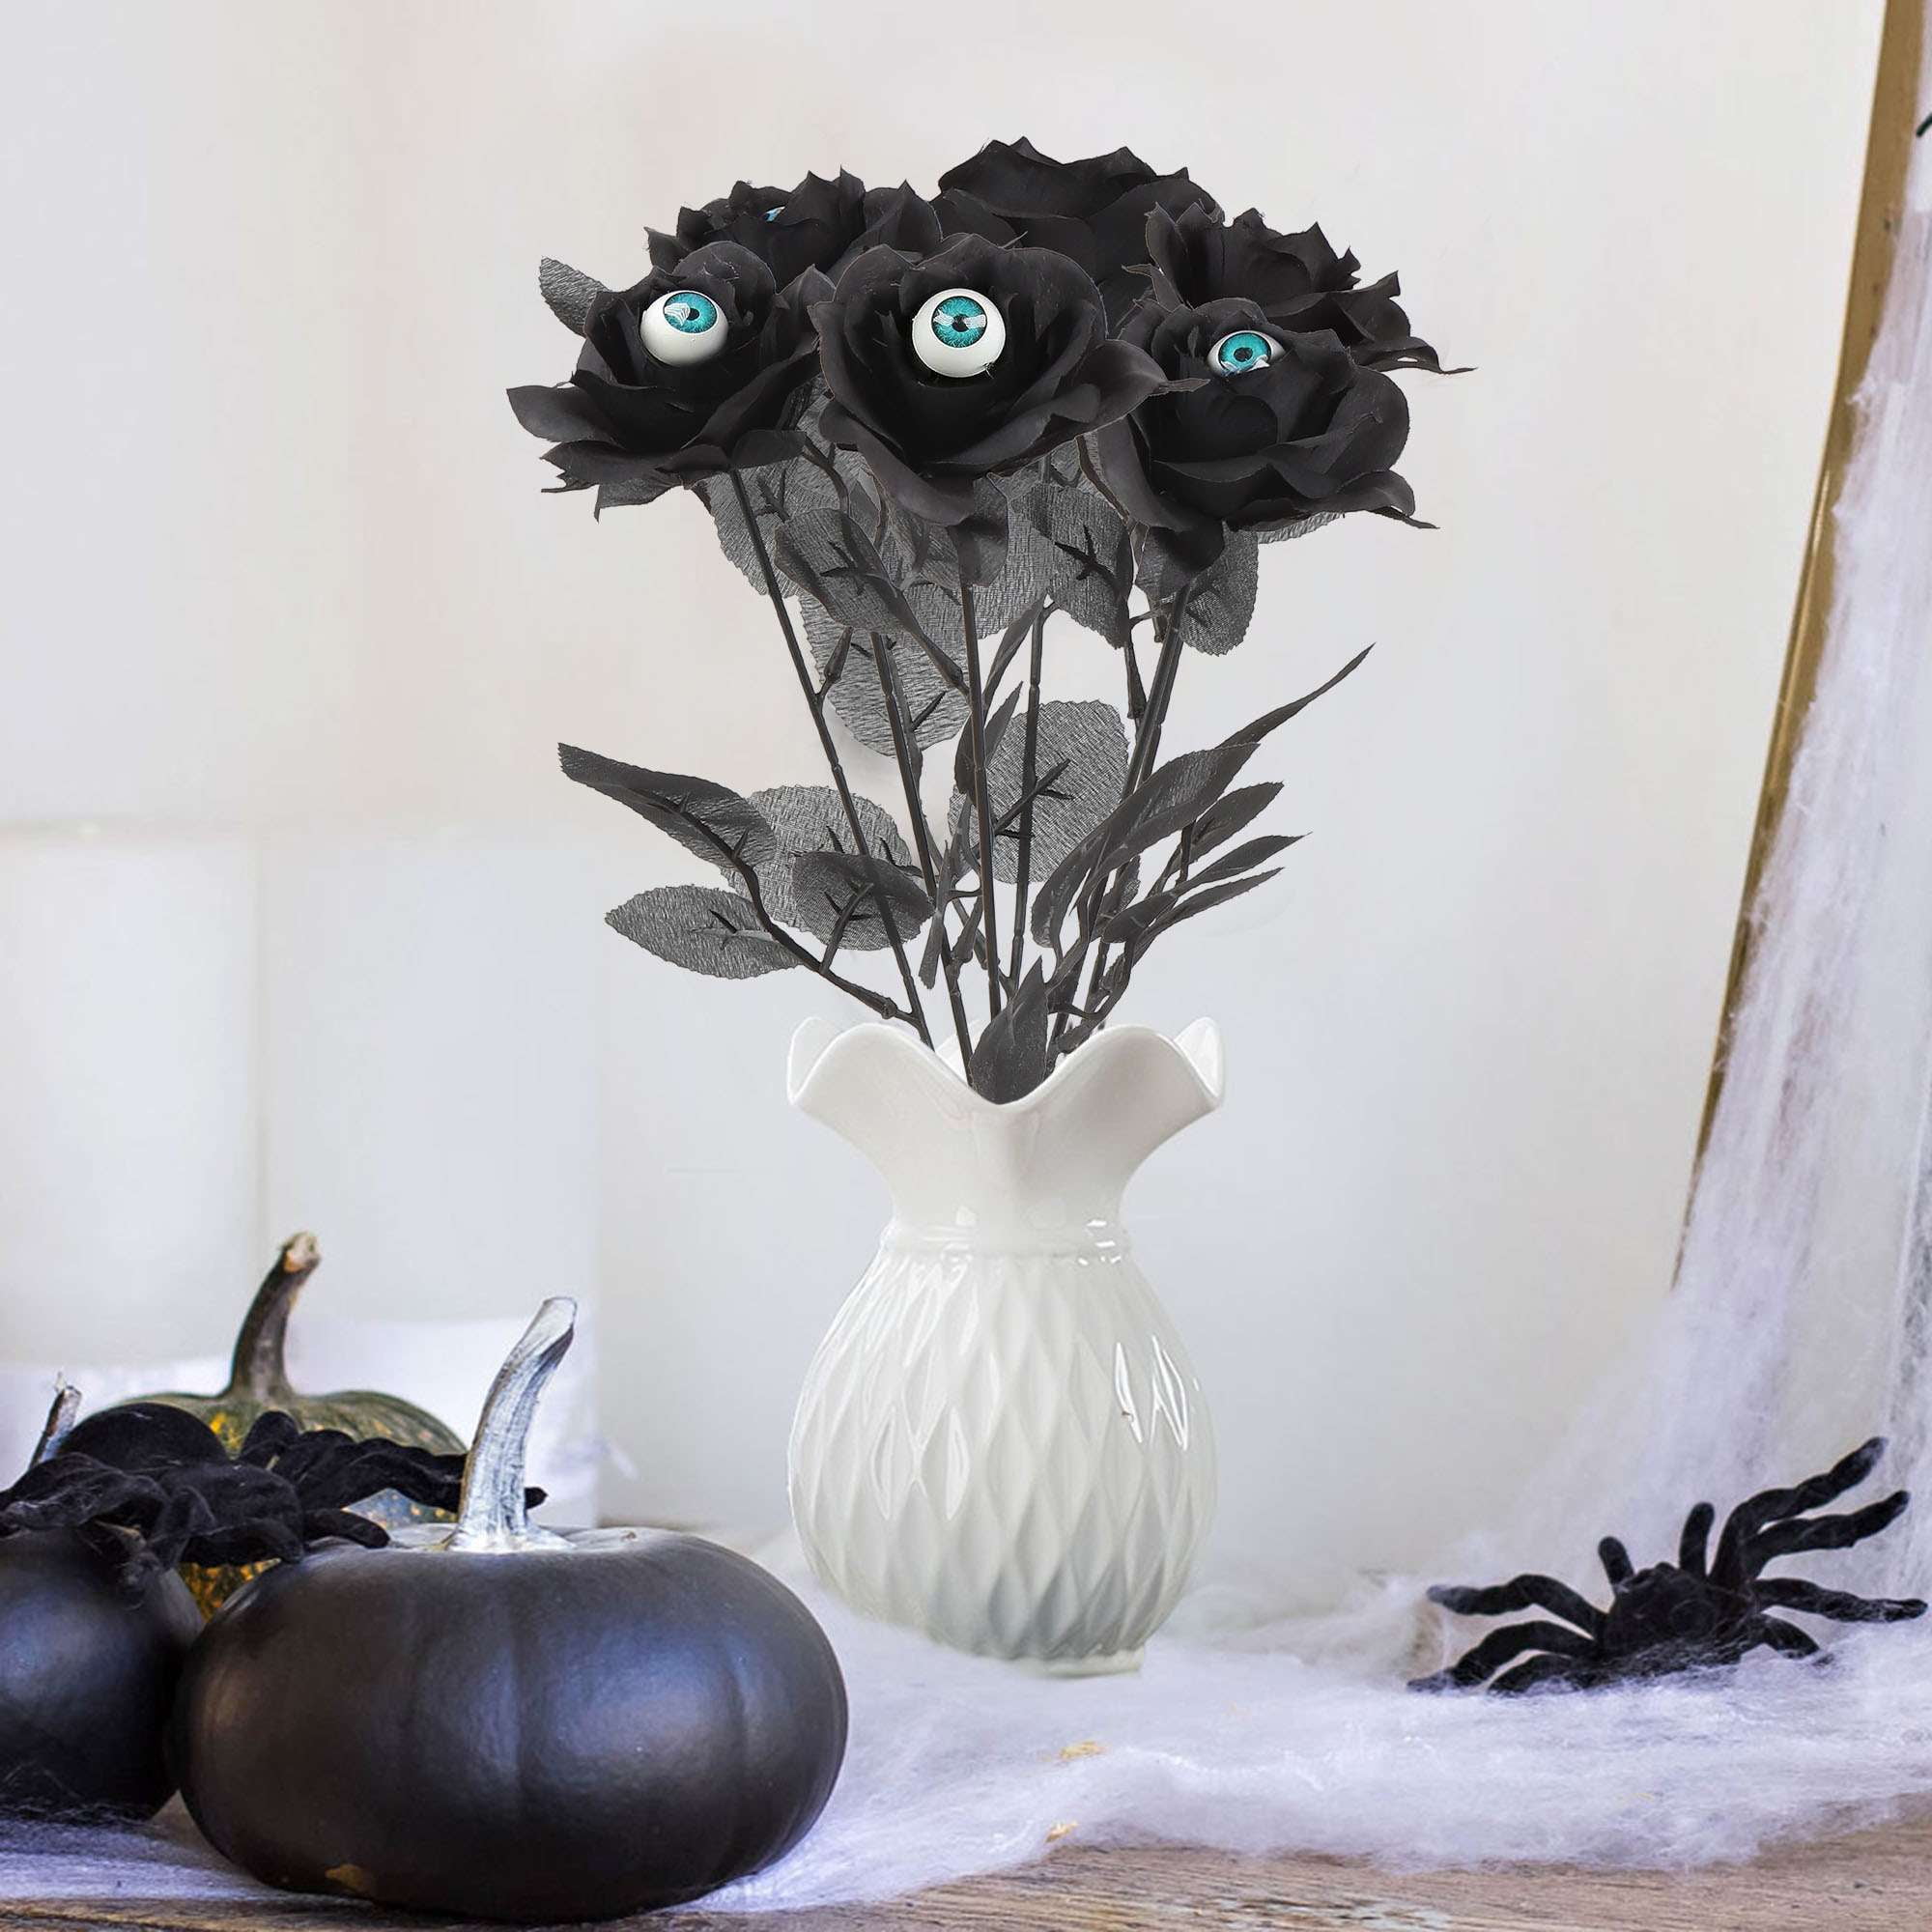 Spencer 8 Pcs Artificial Rose Flowers Black Silk Faux Roses with Plastic  Eyeball Flower Bouquet for Home Party Haunted House Decor Halloween